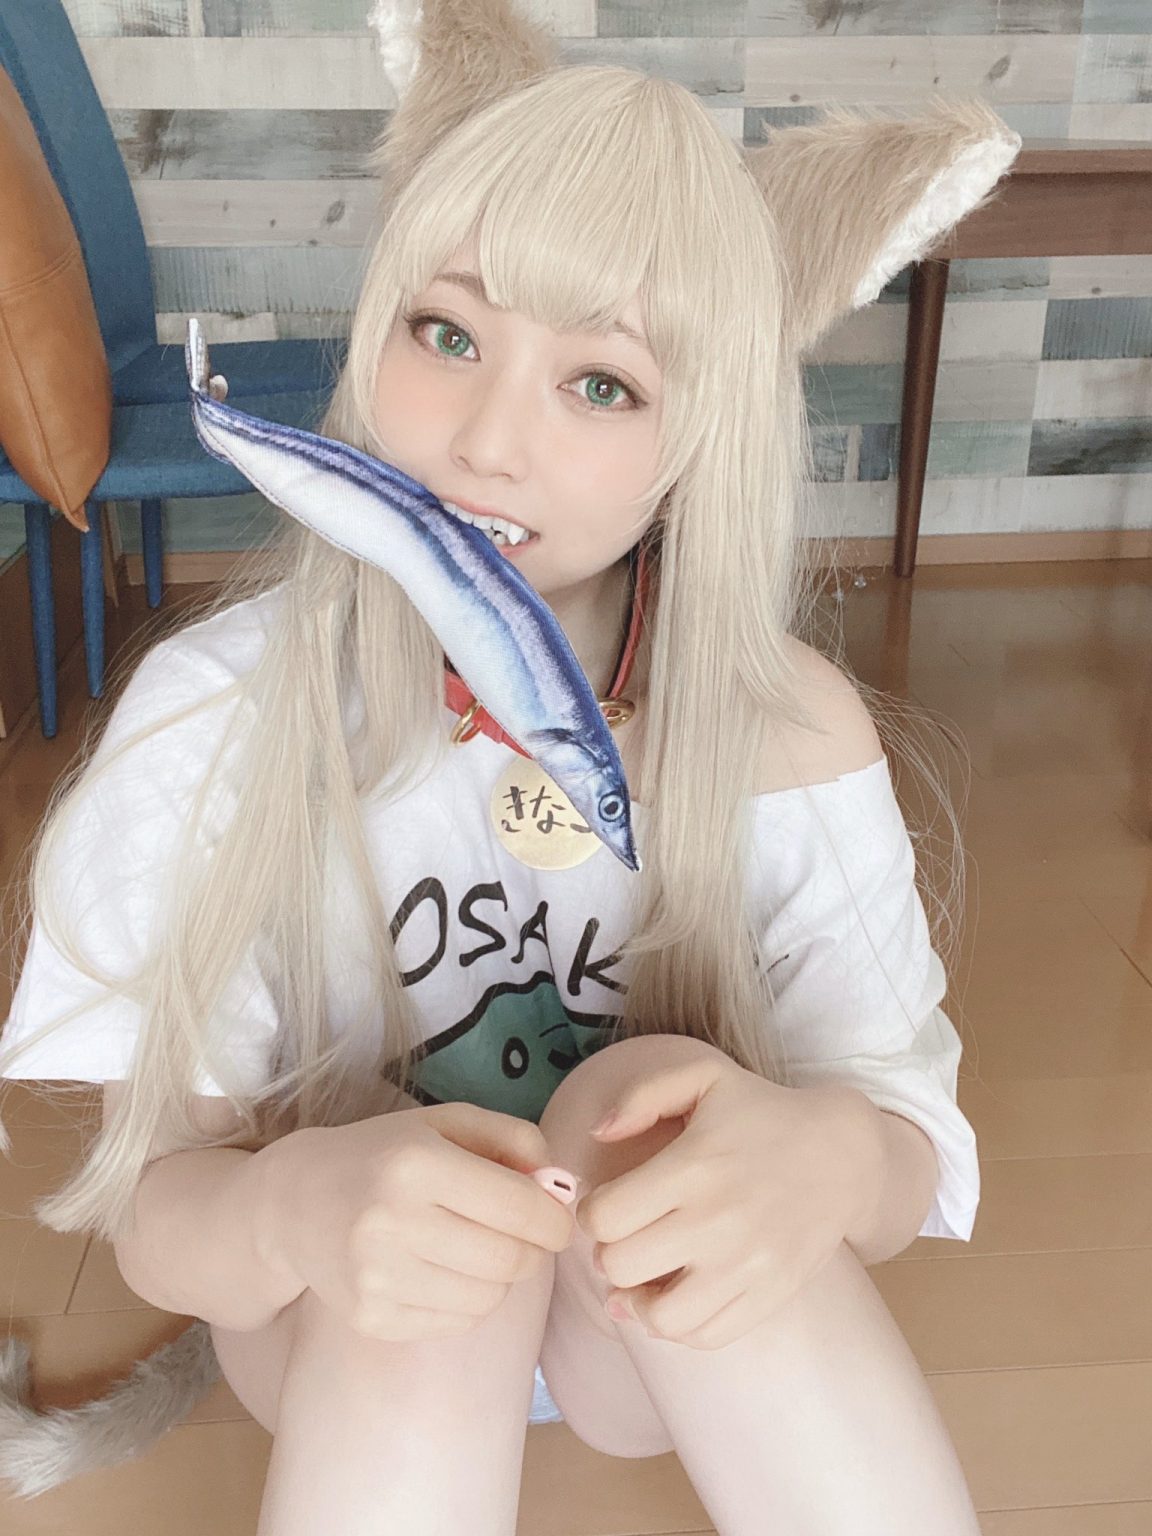 40hara's Catgirl Kinako Comes to Life in This Cosplay by Hoshino Mami